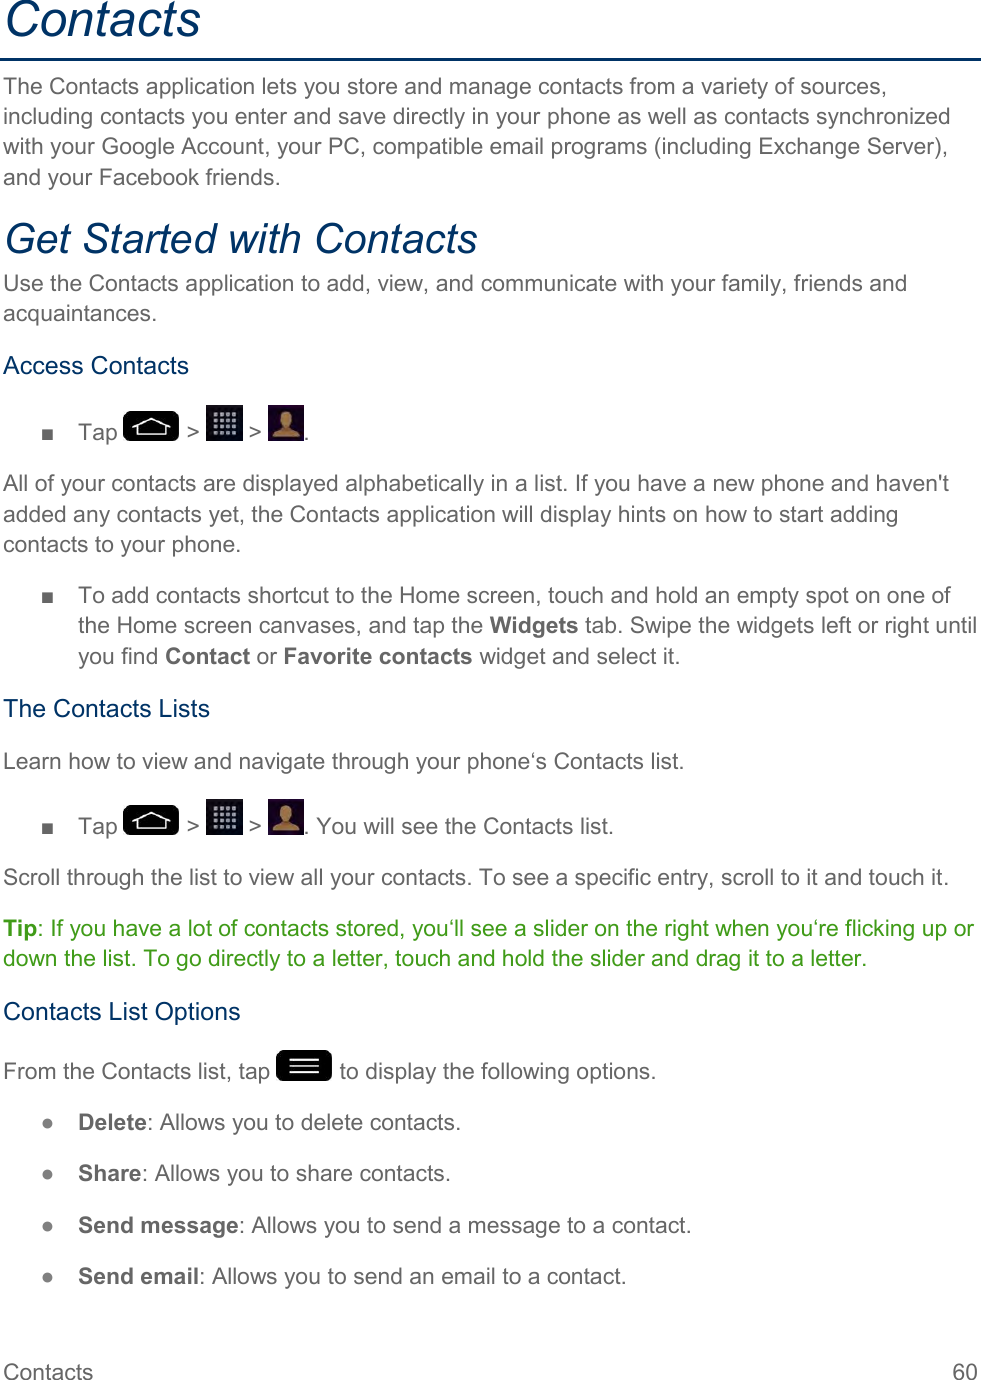 Contacts  60 Contacts The Contacts application lets you store and manage contacts from a variety of sources, including contacts you enter and save directly in your phone as well as contacts synchronized with your Google Account, your PC, compatible email programs (including Exchange Server), and your Facebook friends. Get Started with Contacts Use the Contacts application to add, view, and communicate with your family, friends and acquaintances. Access Contacts ■  Tap   &gt;   &gt;  . All of your contacts are displayed alphabetically in a list. If you have a new phone and haven&apos;t added any contacts yet, the Contacts application will display hints on how to start adding contacts to your phone. ■  To add contacts shortcut to the Home screen, touch and hold an empty spot on one of the Home screen canvases, and tap the Widgets tab. Swipe the widgets left or right until you find Contact or Favorite contacts widget and select it. The Contacts Lists Learn how to view and navigate through your phone‘s Contacts list. ■  Tap   &gt;   &gt;  . You will see the Contacts list. Scroll through the list to view all your contacts. To see a specific entry, scroll to it and touch it. Tip: If you have a lot of contacts stored, you‘ll see a slider on the right when you‘re flicking up or down the list. To go directly to a letter, touch and hold the slider and drag it to a letter. Contacts List Options From the Contacts list, tap   to display the following options. ●  Delete: Allows you to delete contacts. ●  Share: Allows you to share contacts. ●  Send message: Allows you to send a message to a contact. ●  Send email: Allows you to send an email to a contact. 